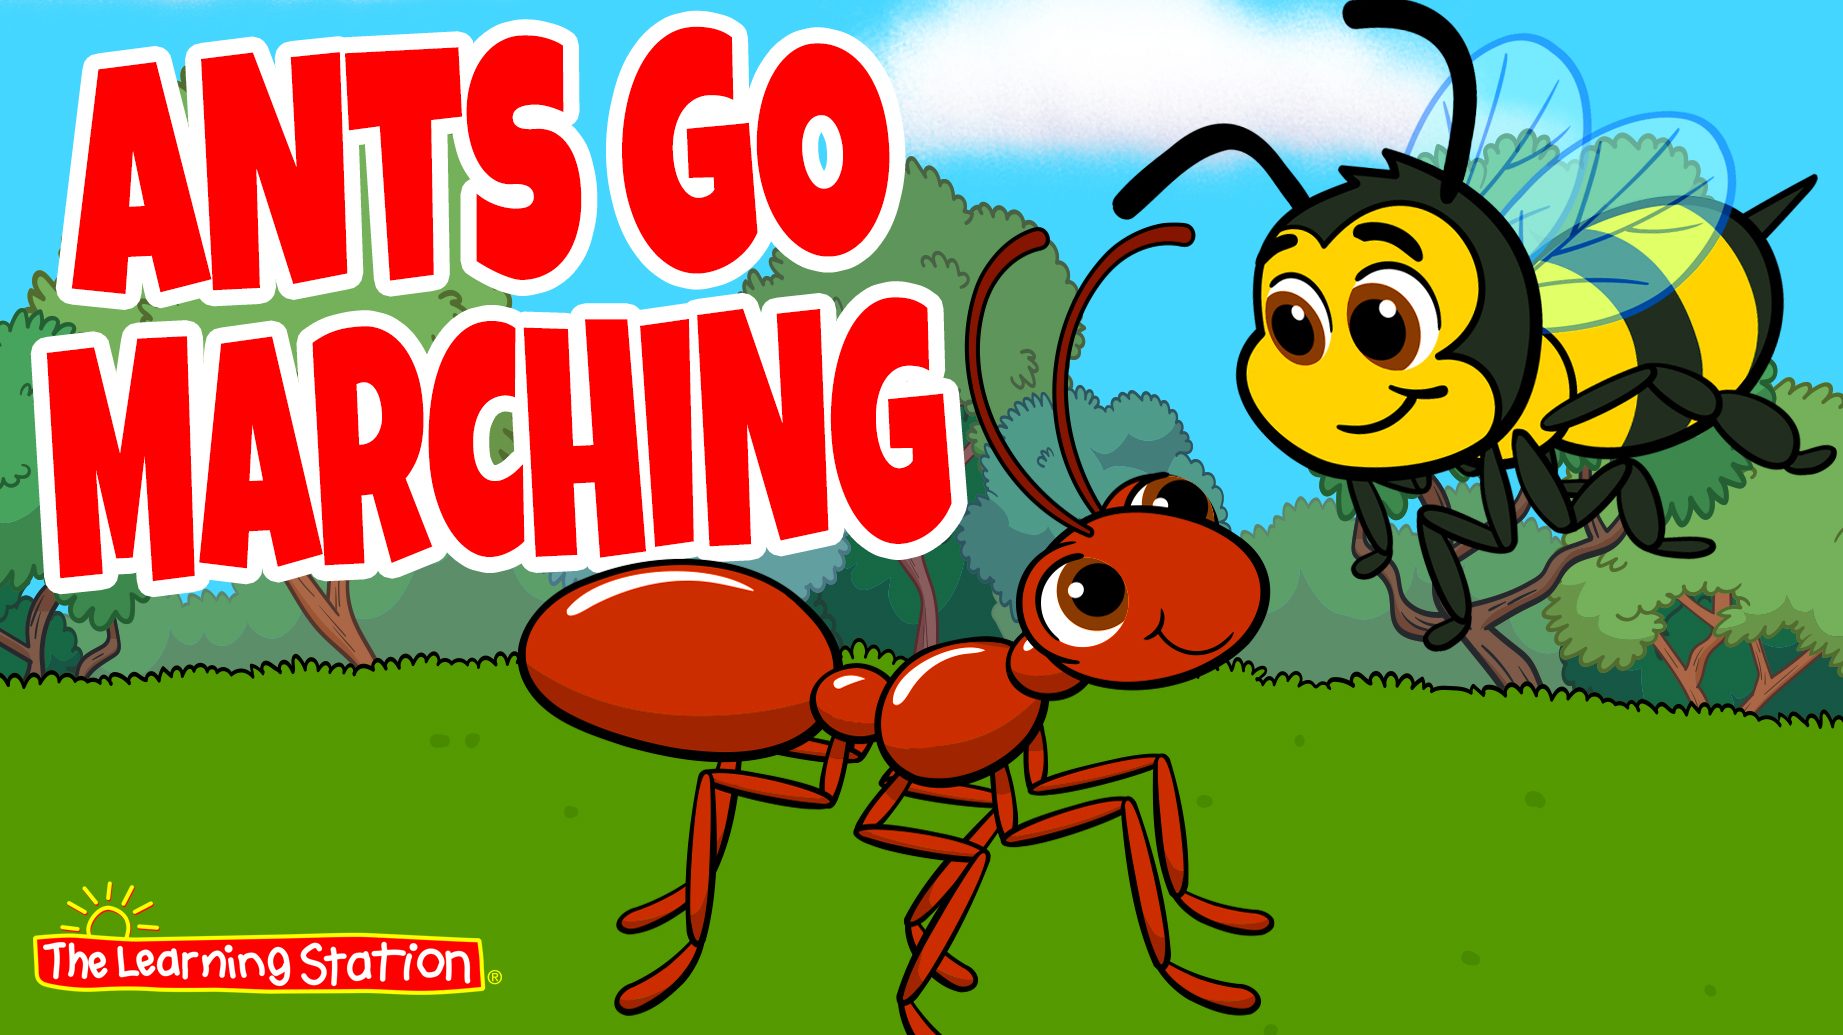 Ants Go Marching-Video for Kids | The Learning Station